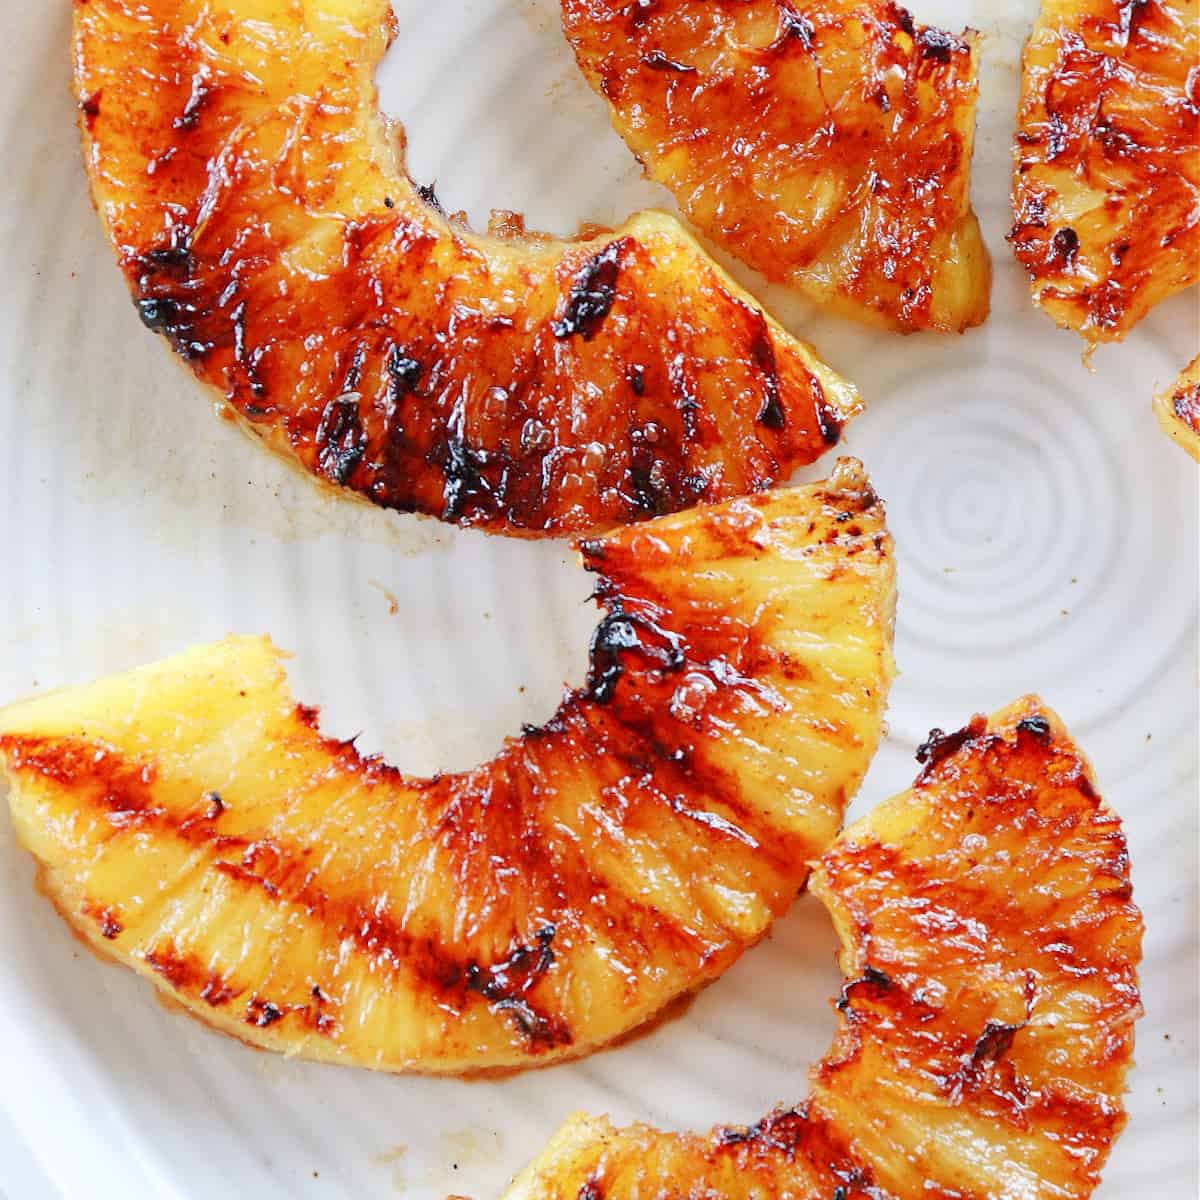 Slices of grilled pineapple on a plate.